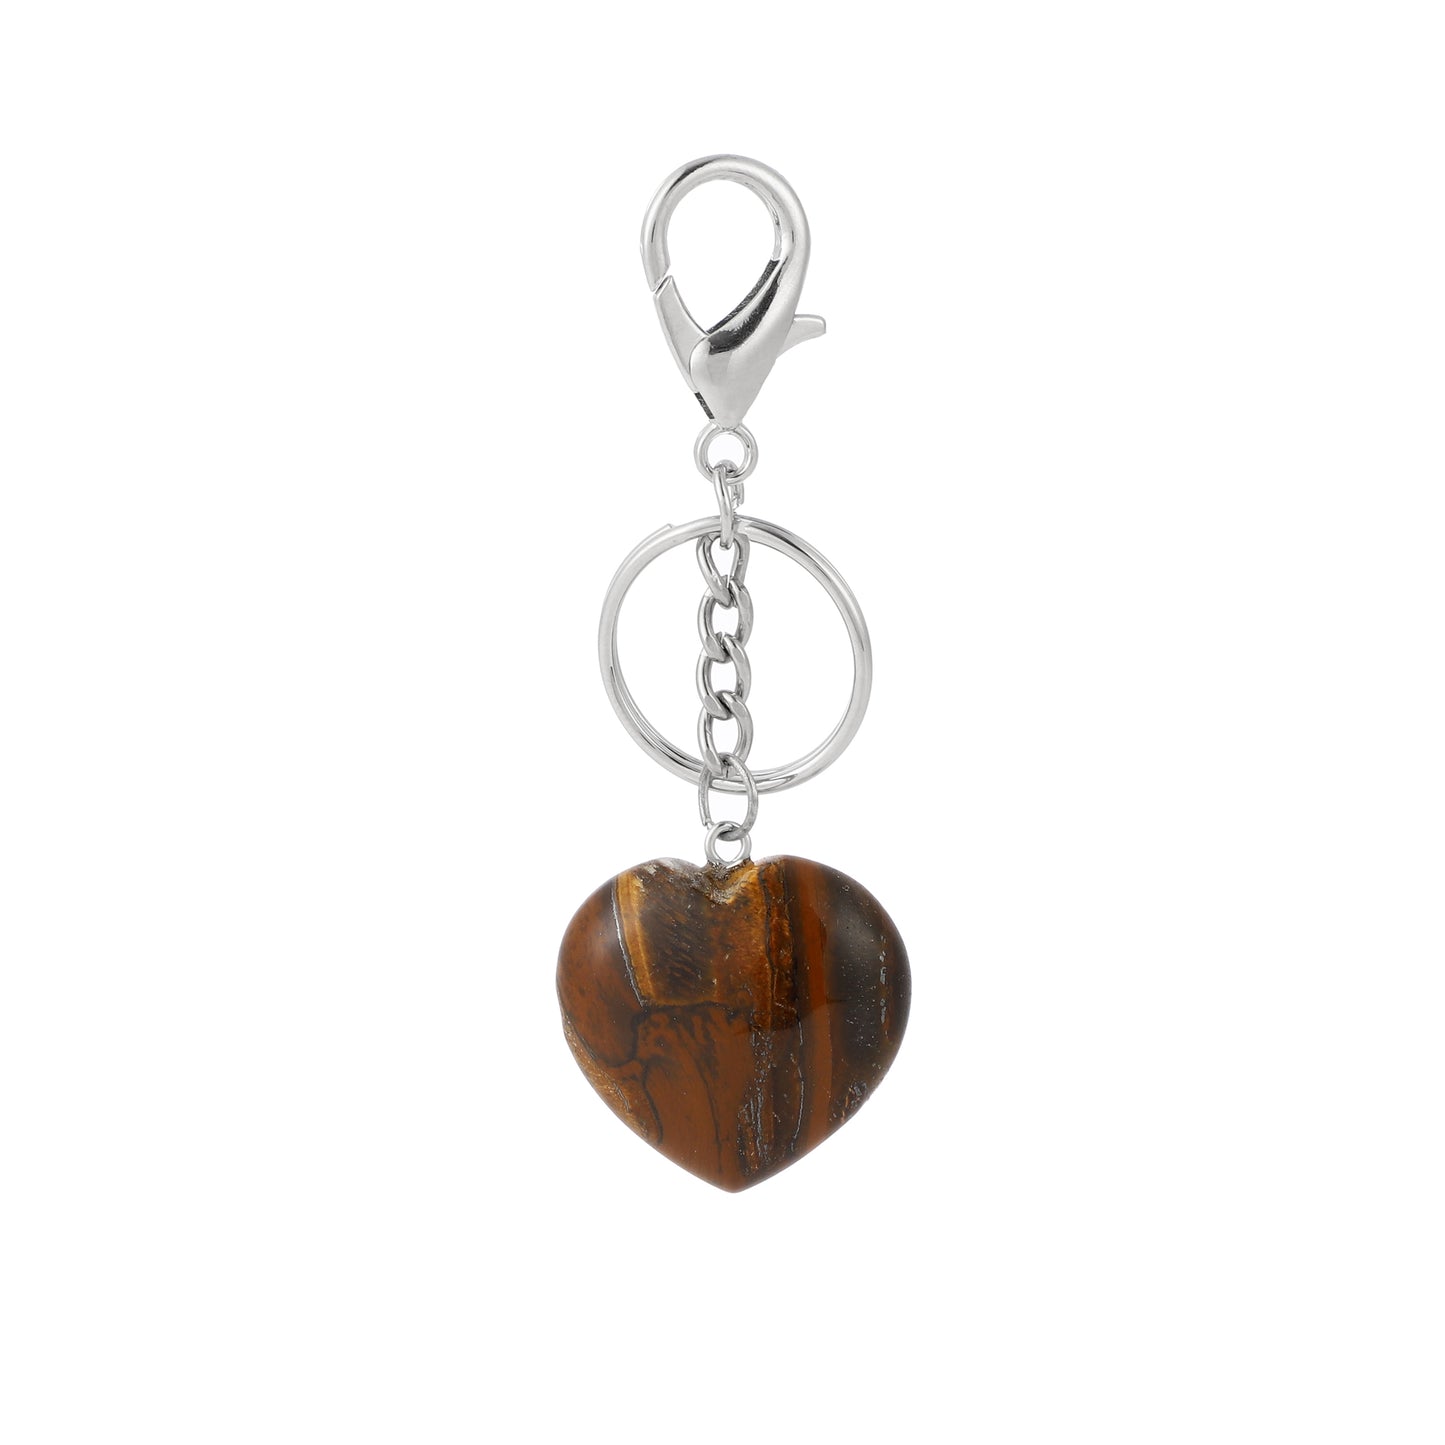 30 Heart Keychain - Symbolize Love and Style with Our Heart-shaped Keychain